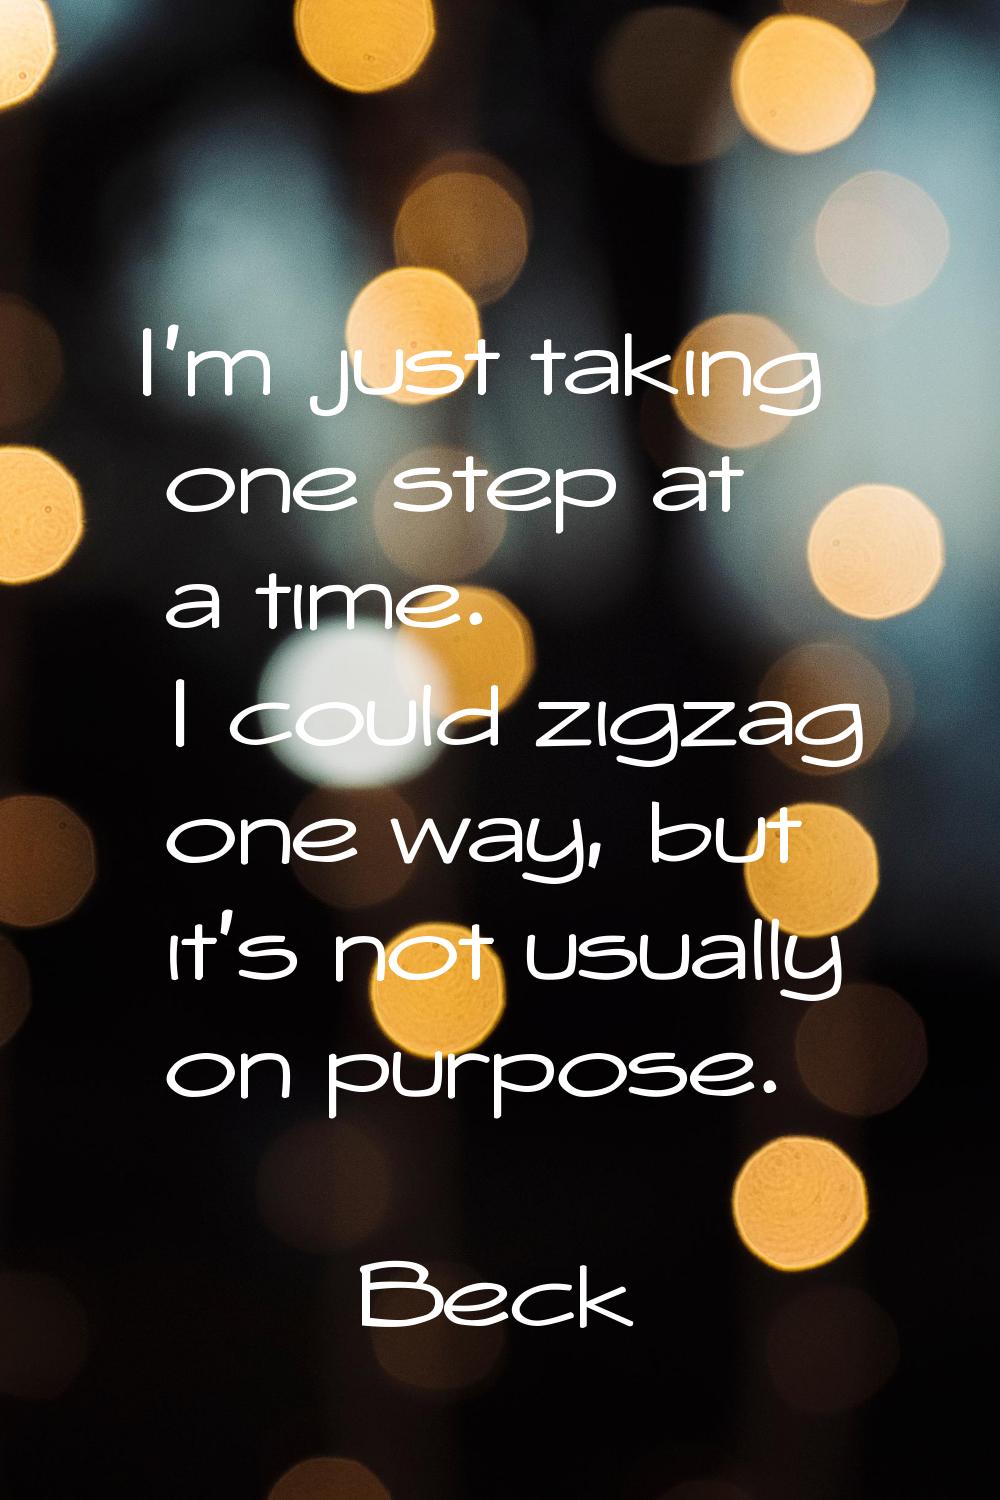 I'm just taking one step at a time. I could zigzag one way, but it's not usually on purpose.